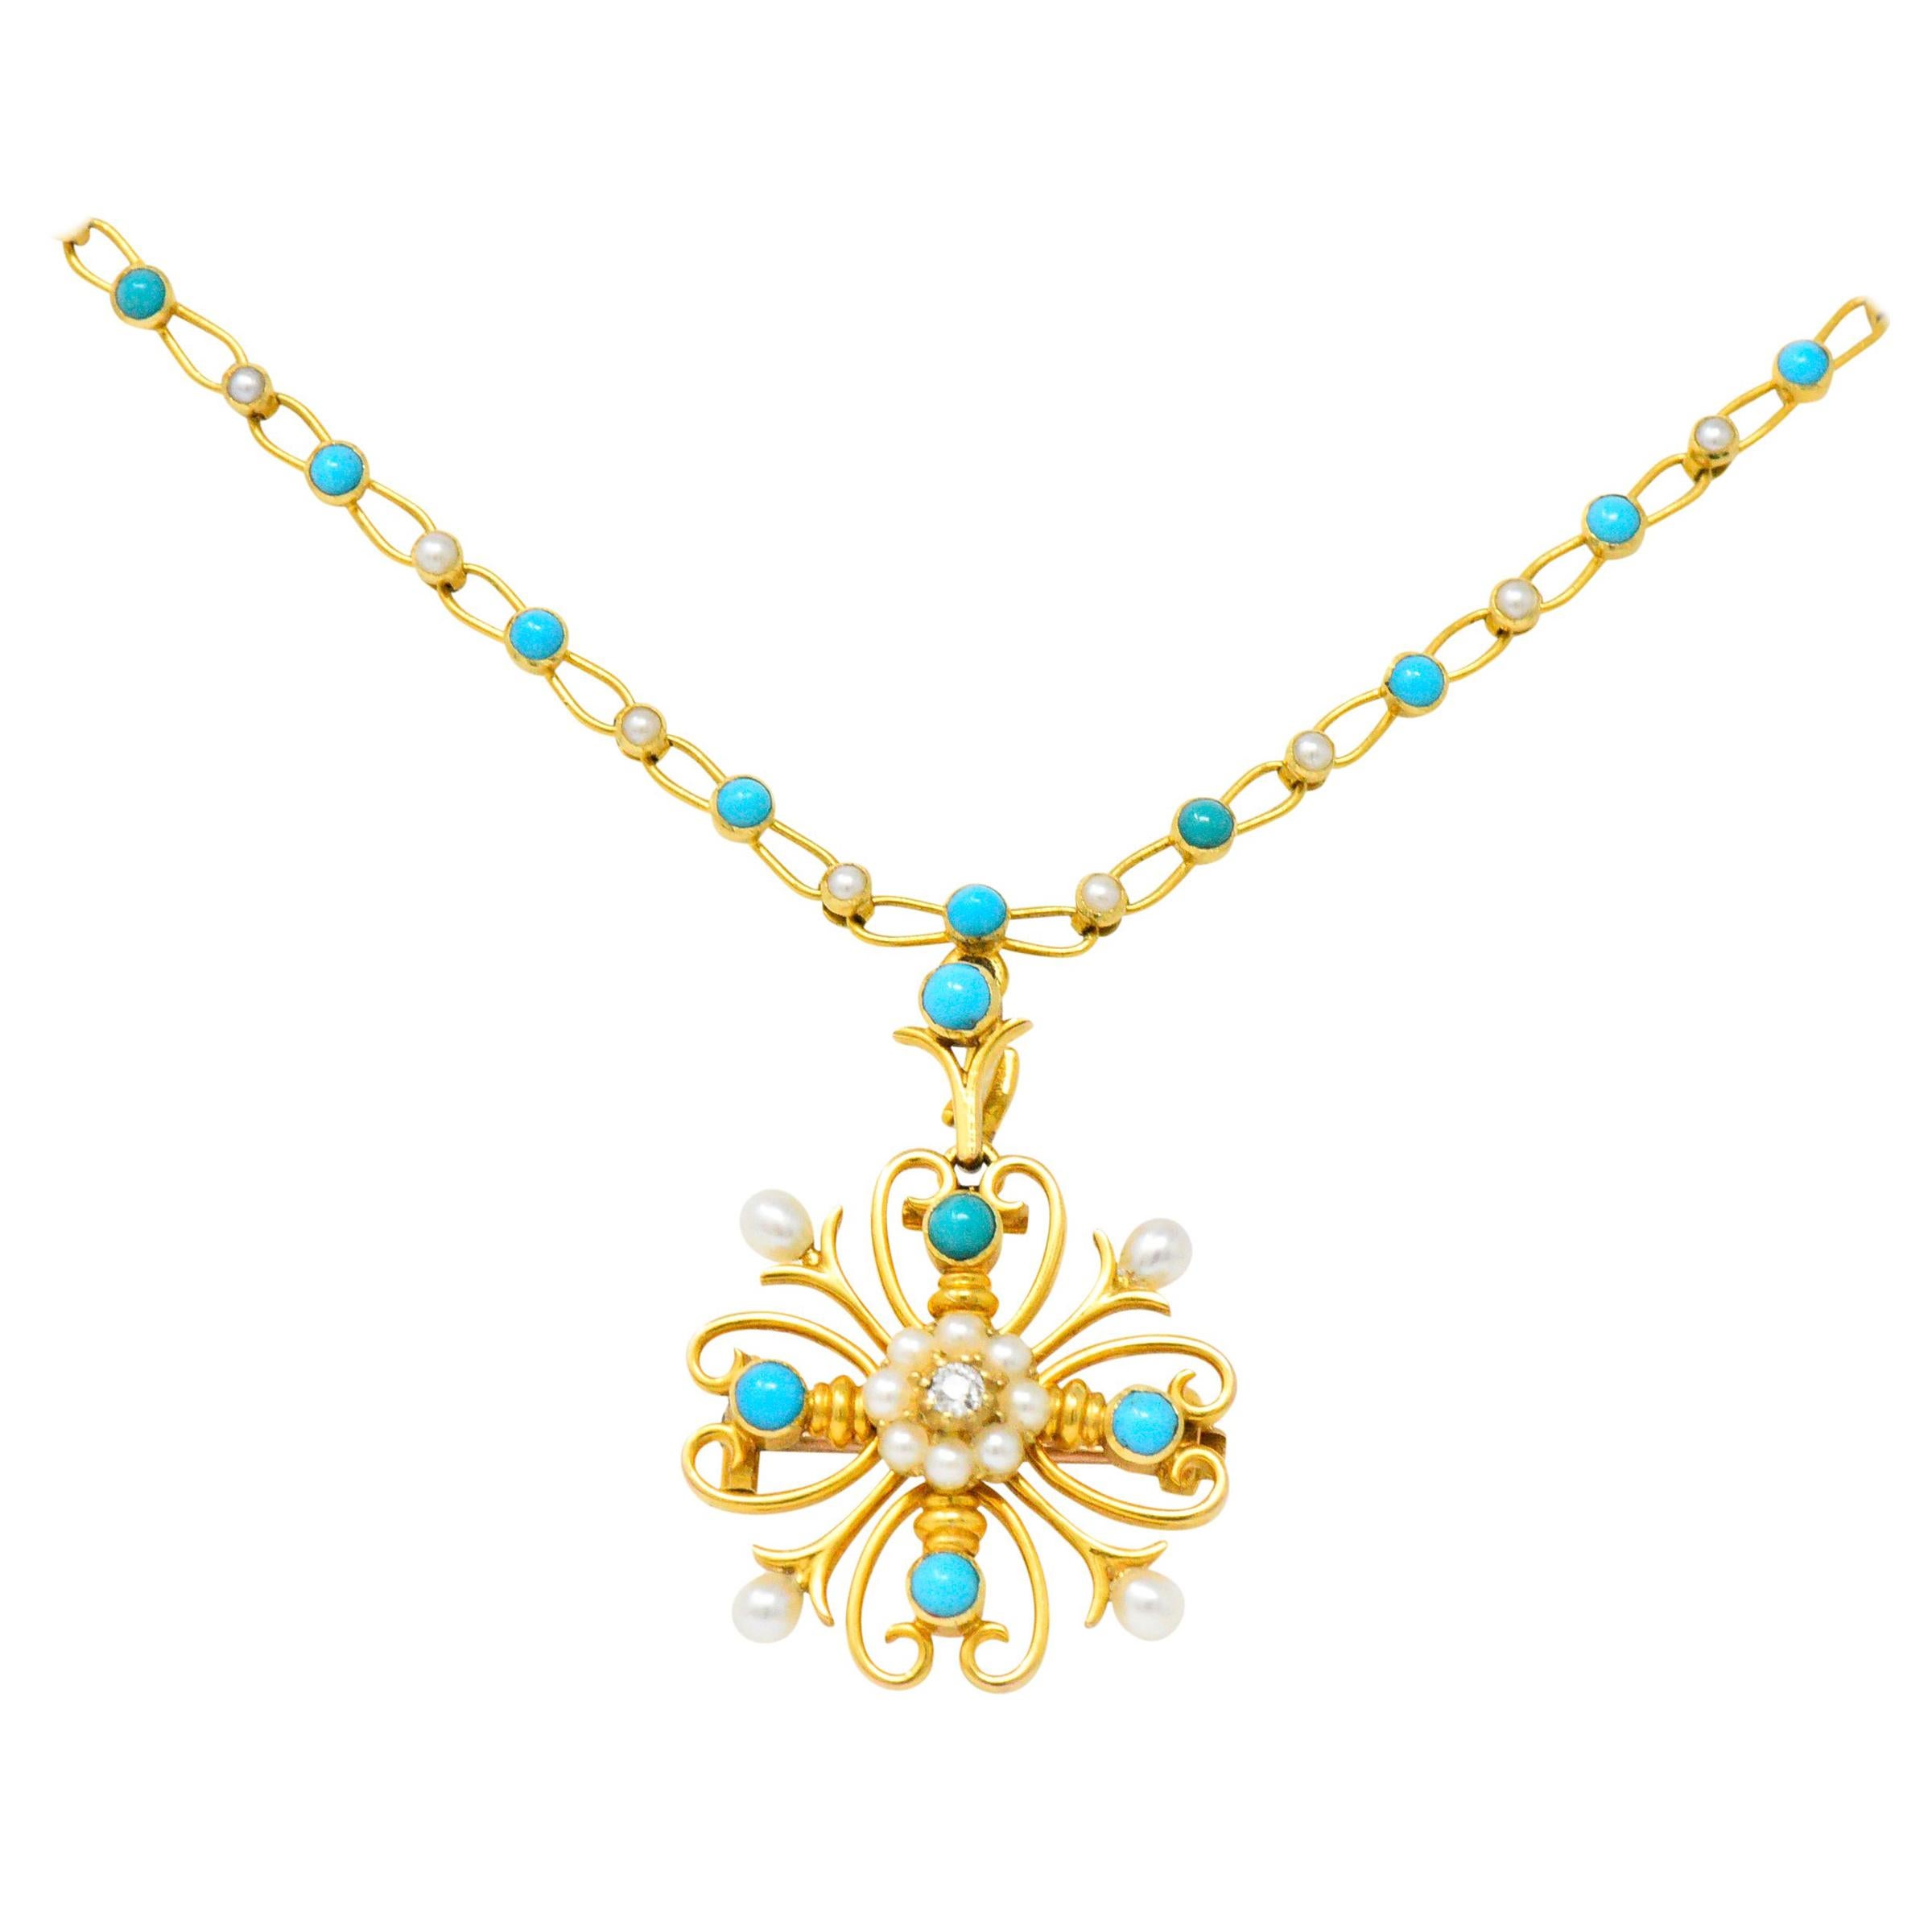 Victorian Diamond Seed Pearl Turquoise 18 Karat Gold Brooch Pendant Necklace